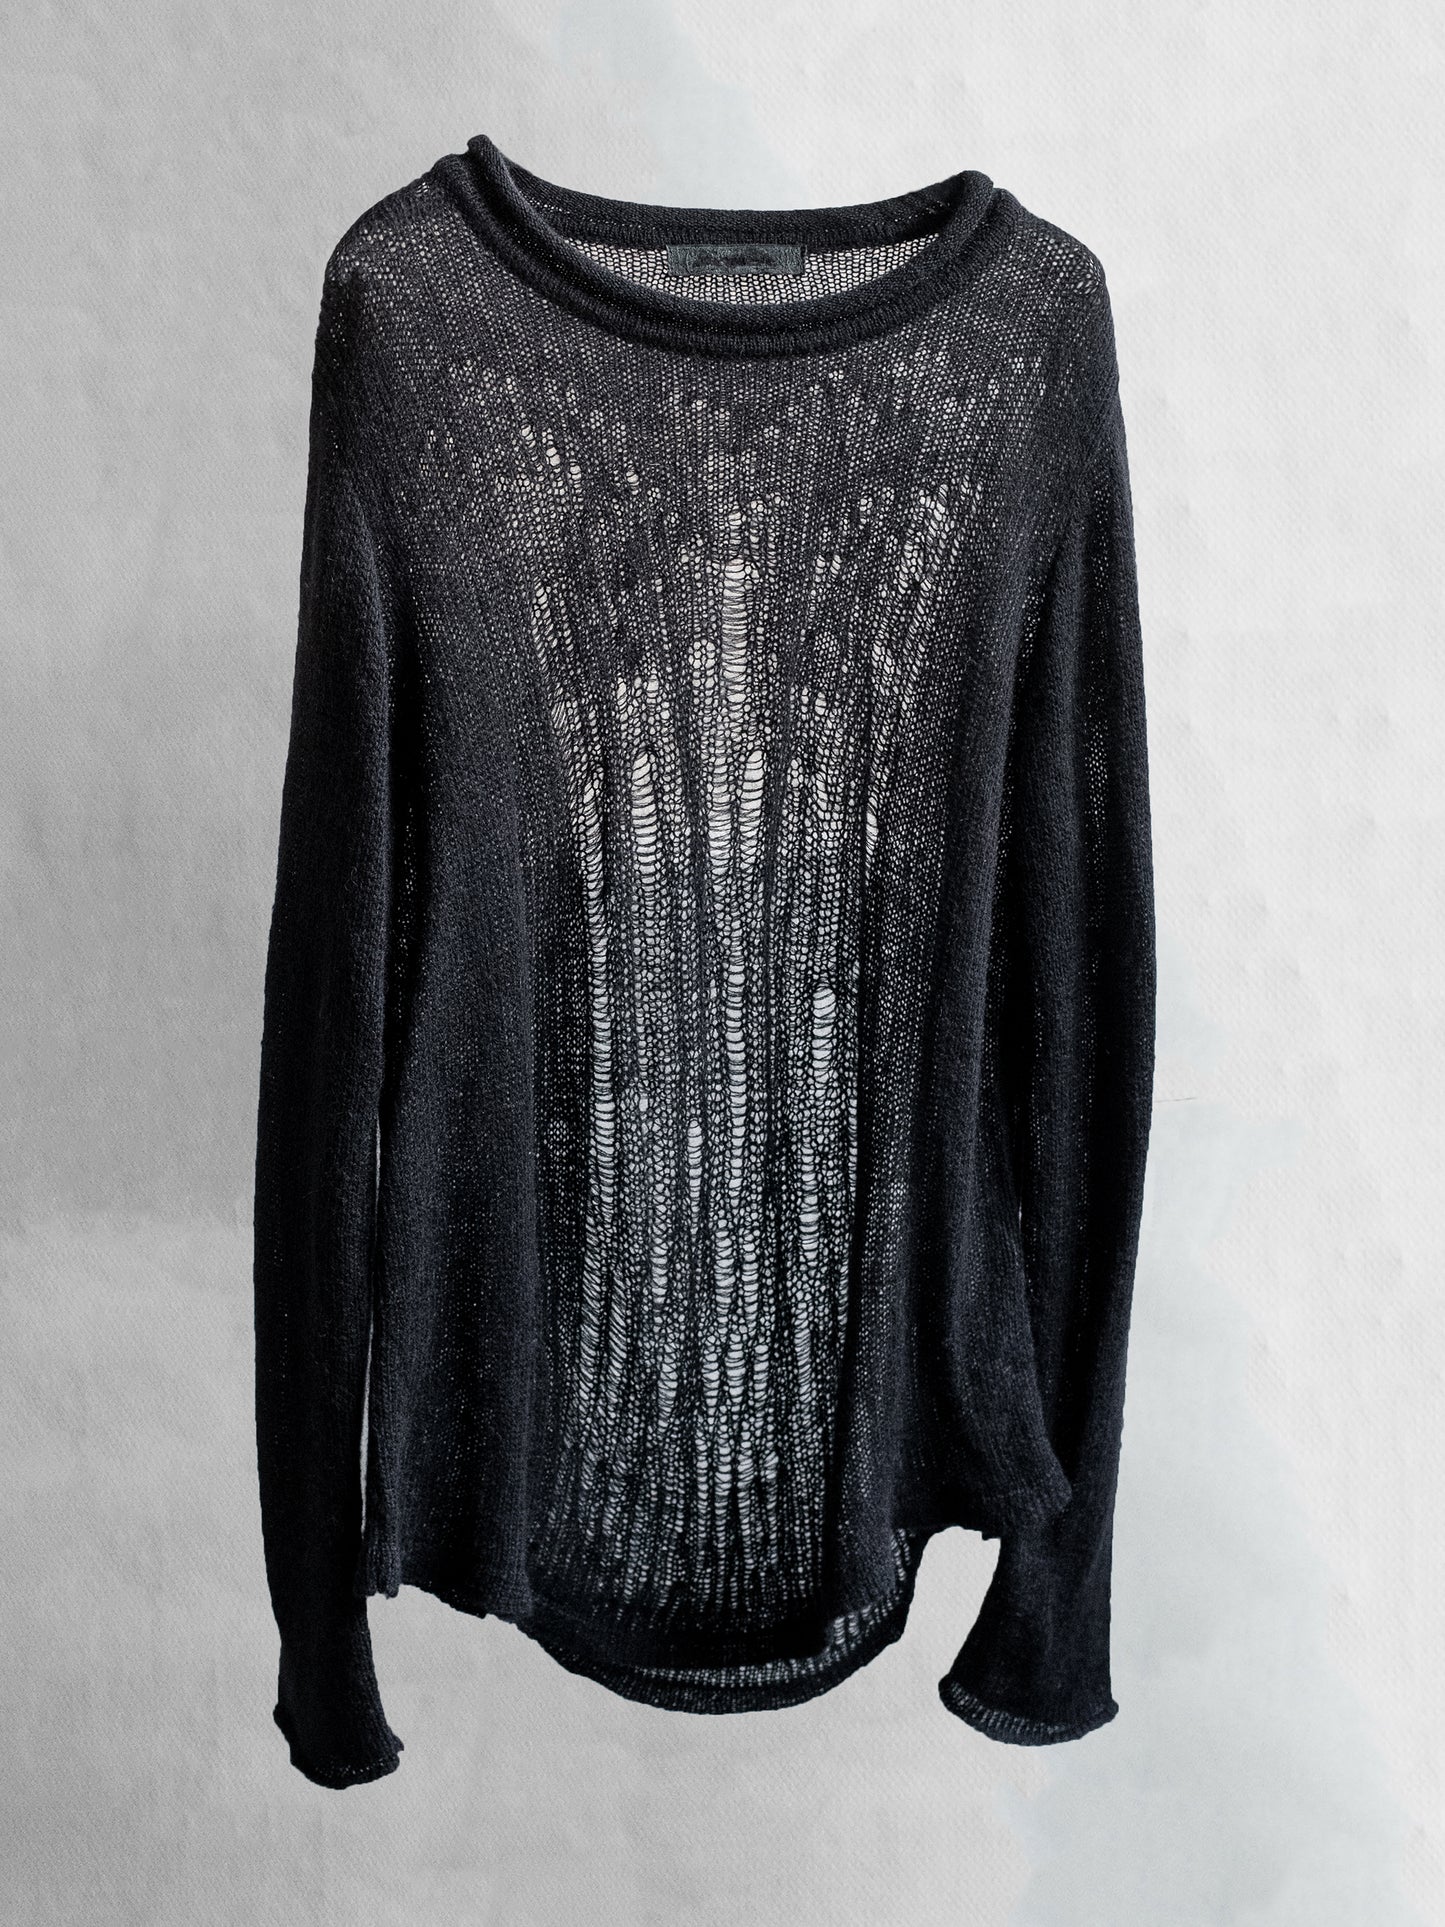 distressed mohair knit / black